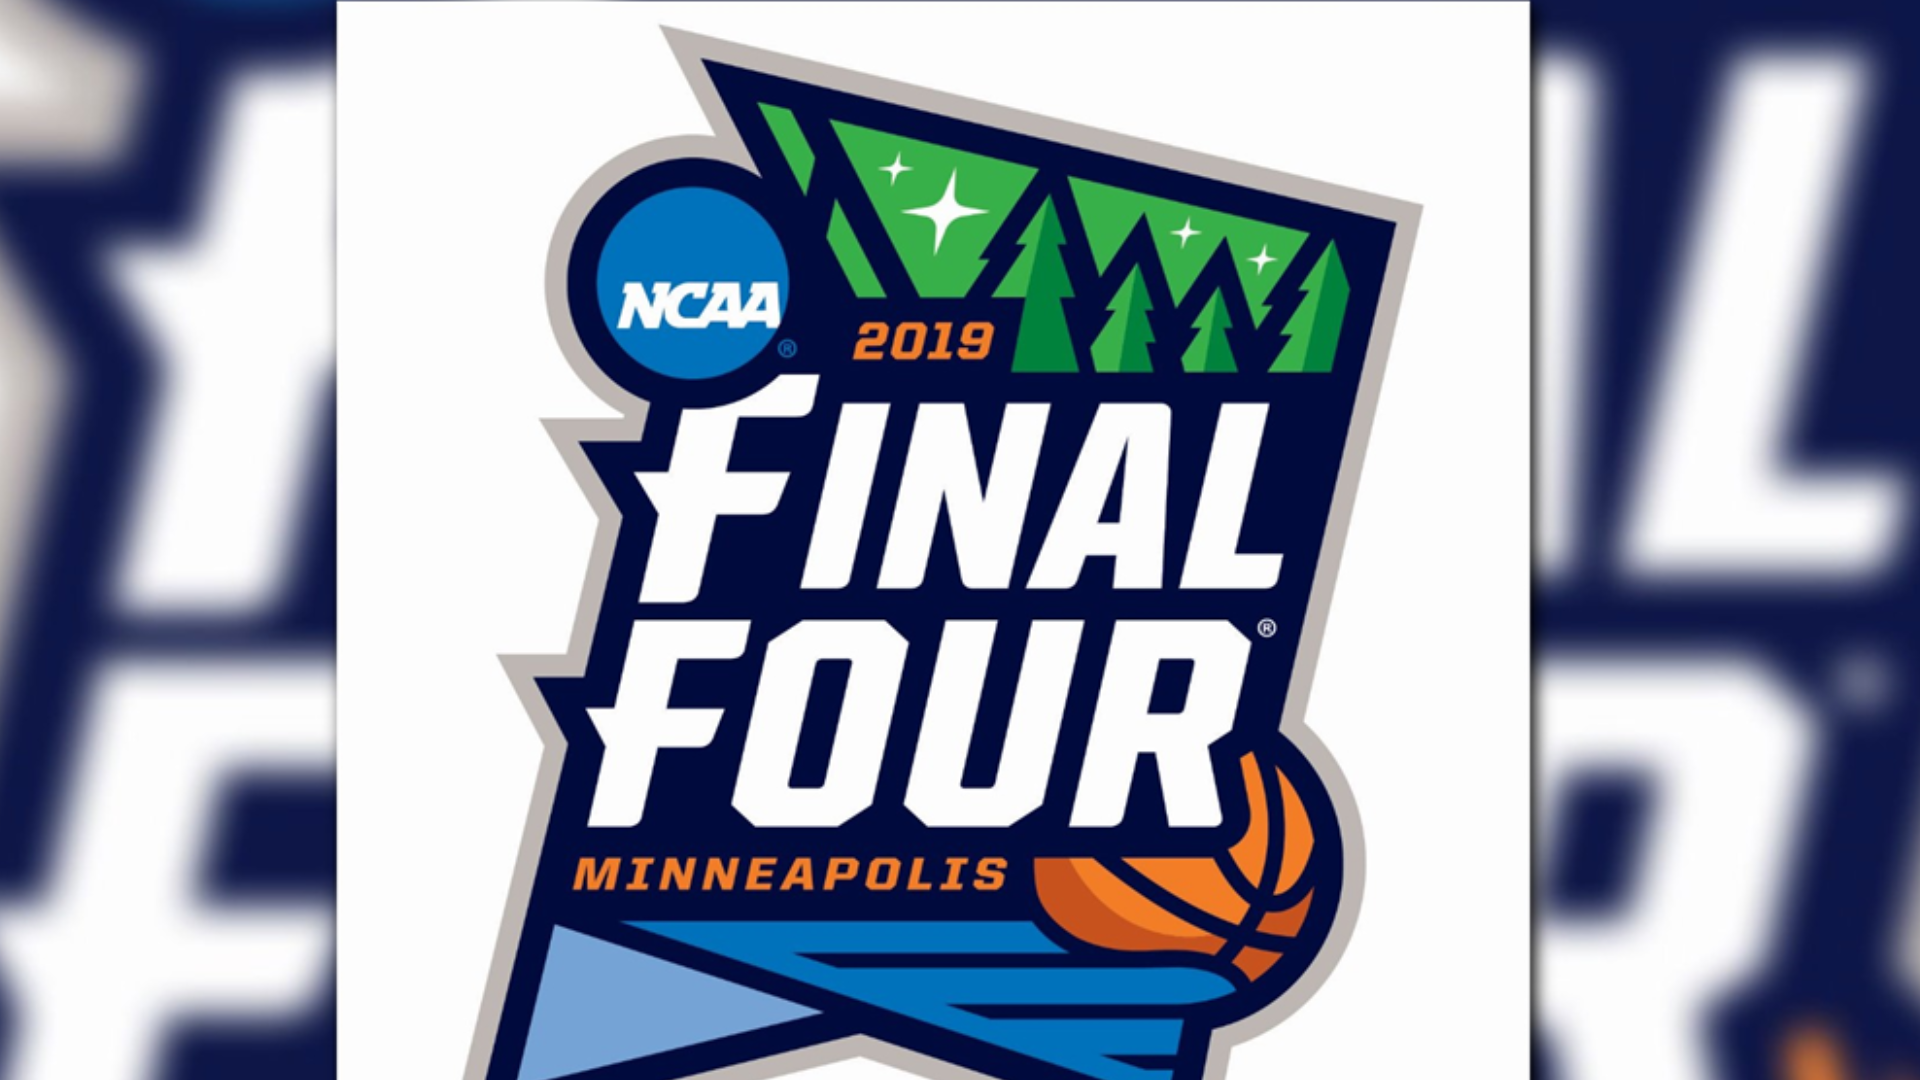 Check out these fun facts about the Final Four over the years.